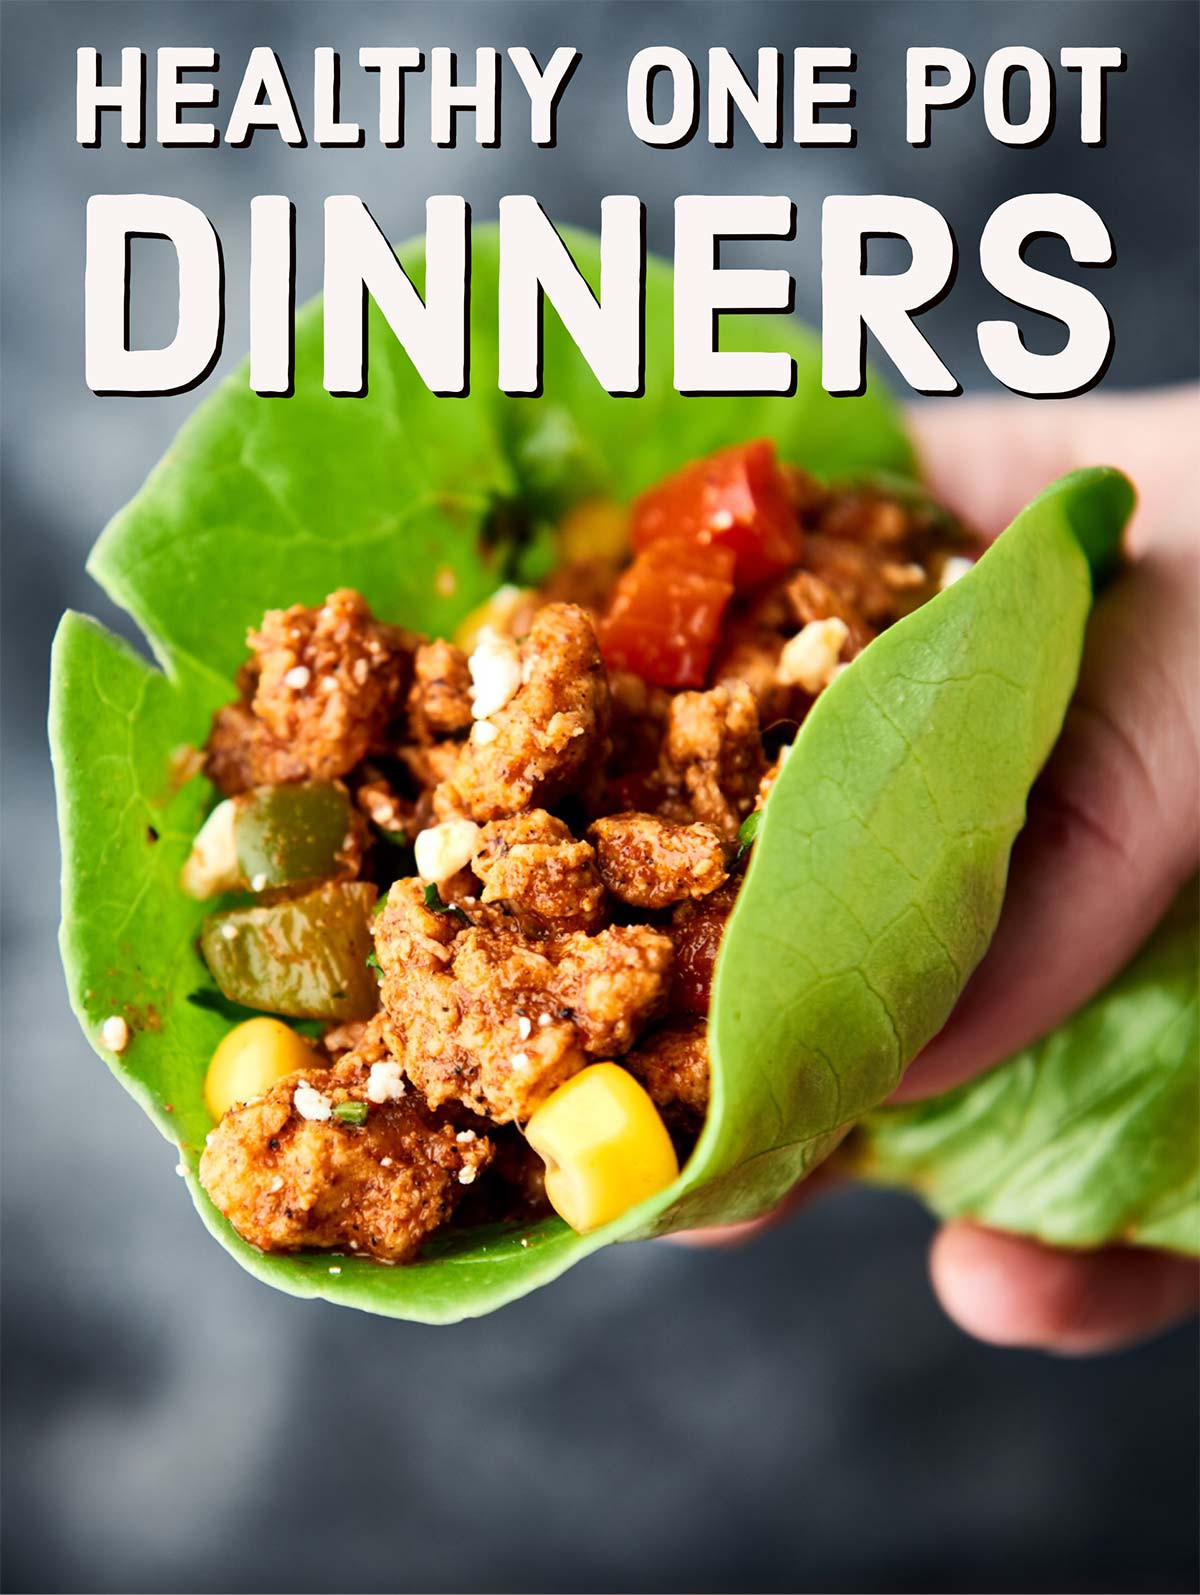 Dinner Ideas For One
 Healthy e Pot Dinner Recipes Show Me the Yummy